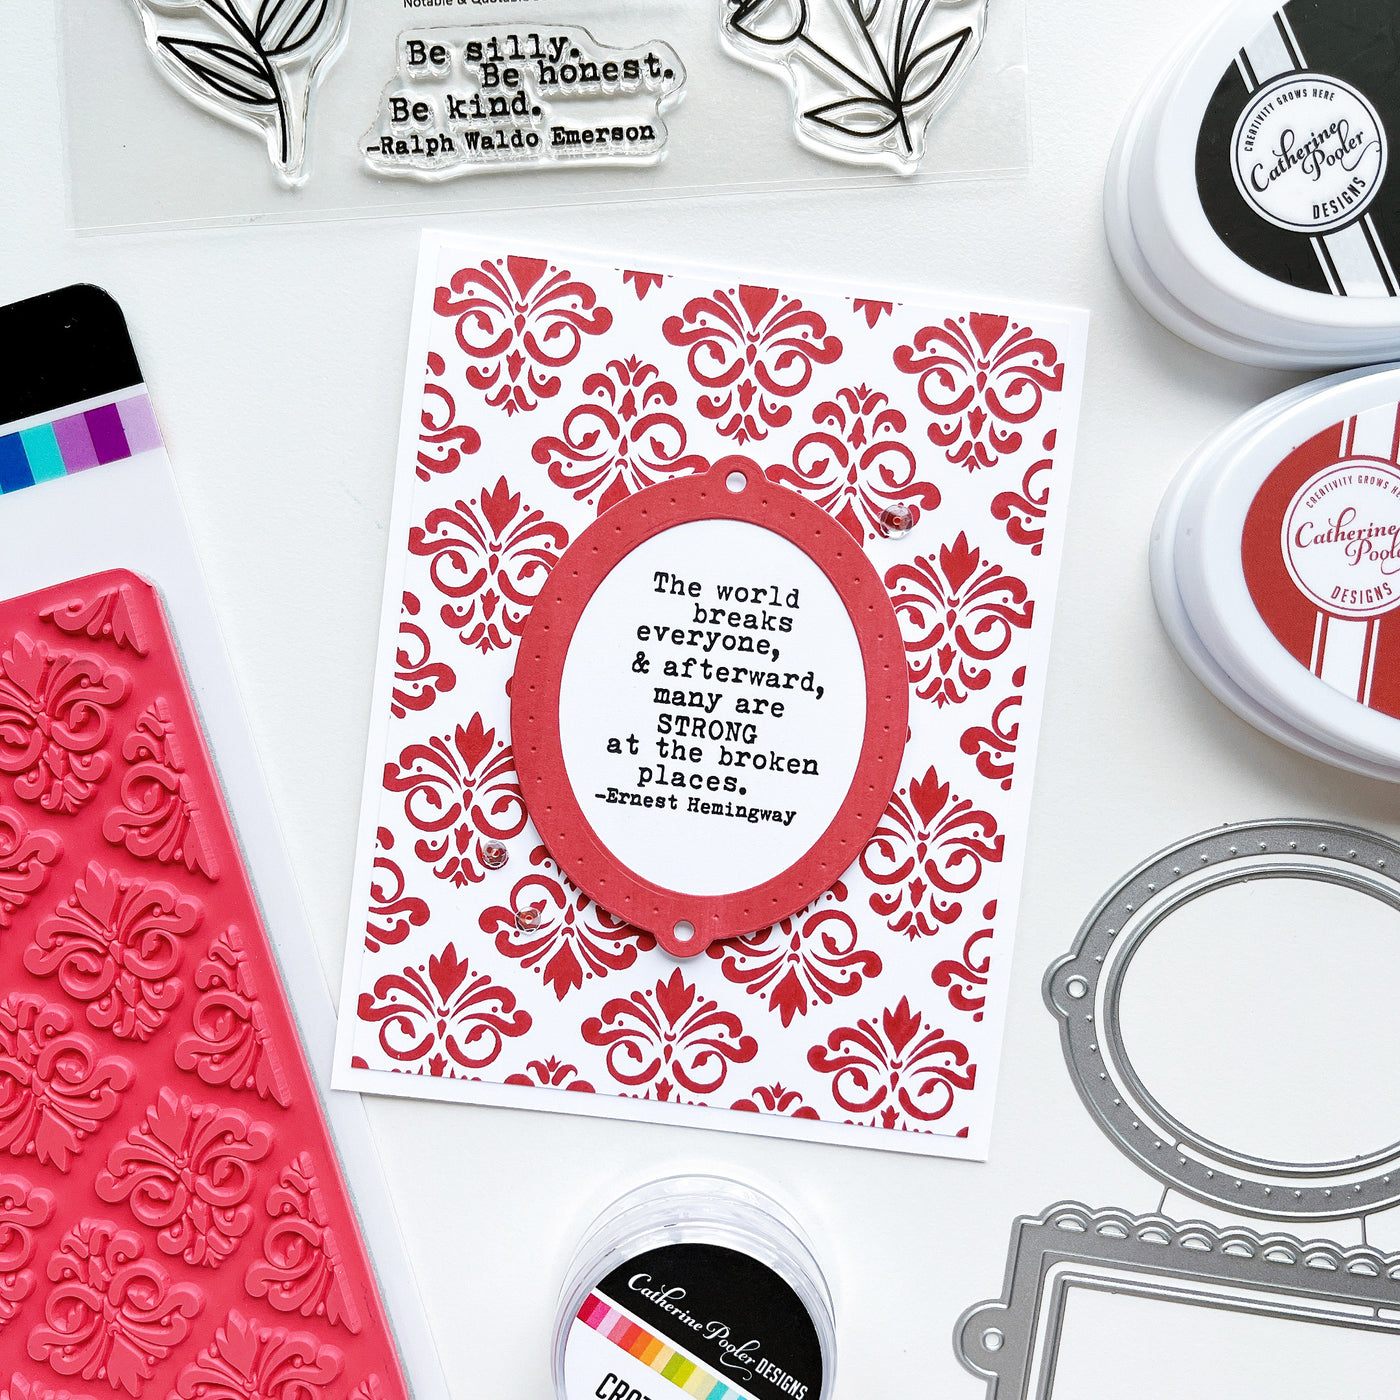 Lagoon Exclusive Inks™ Stamp Pad (Z2895)